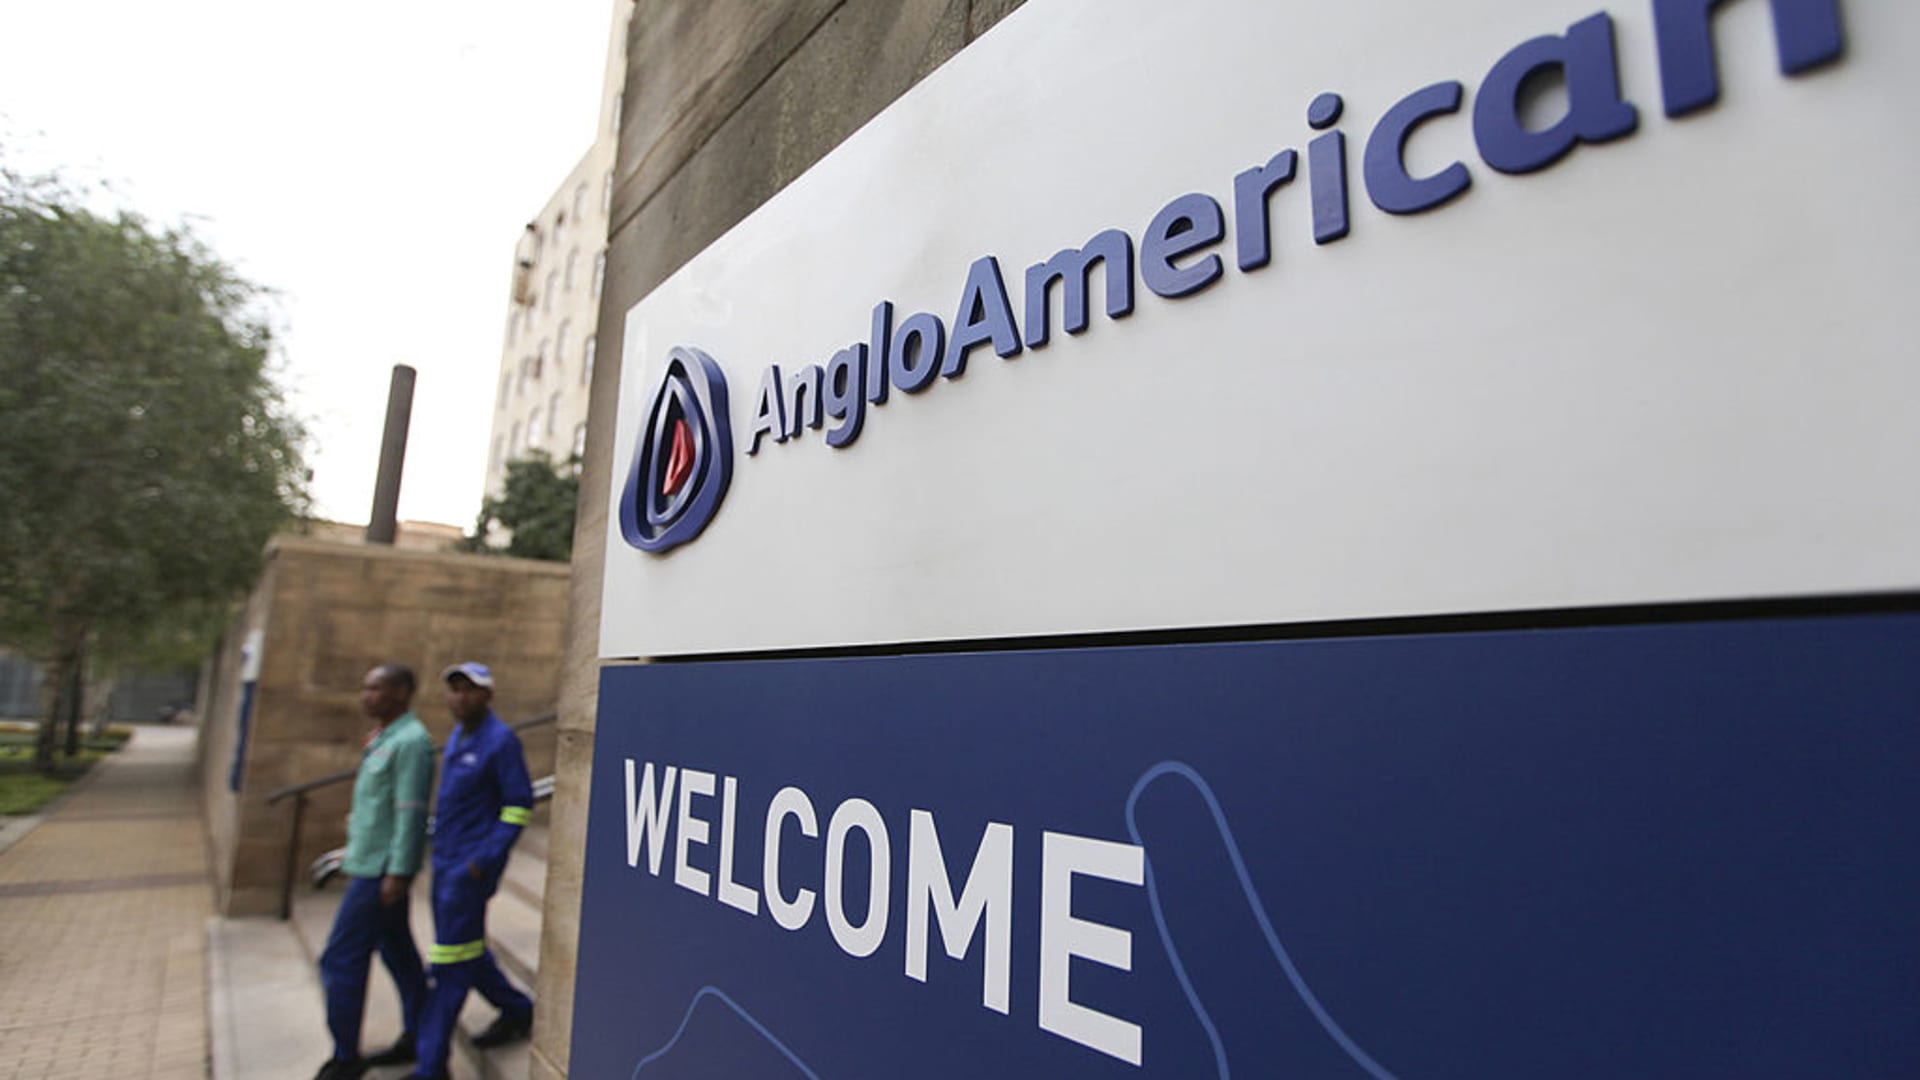 Elliott normally takes $1 billion stake in Anglo American as miner faces takeover interest